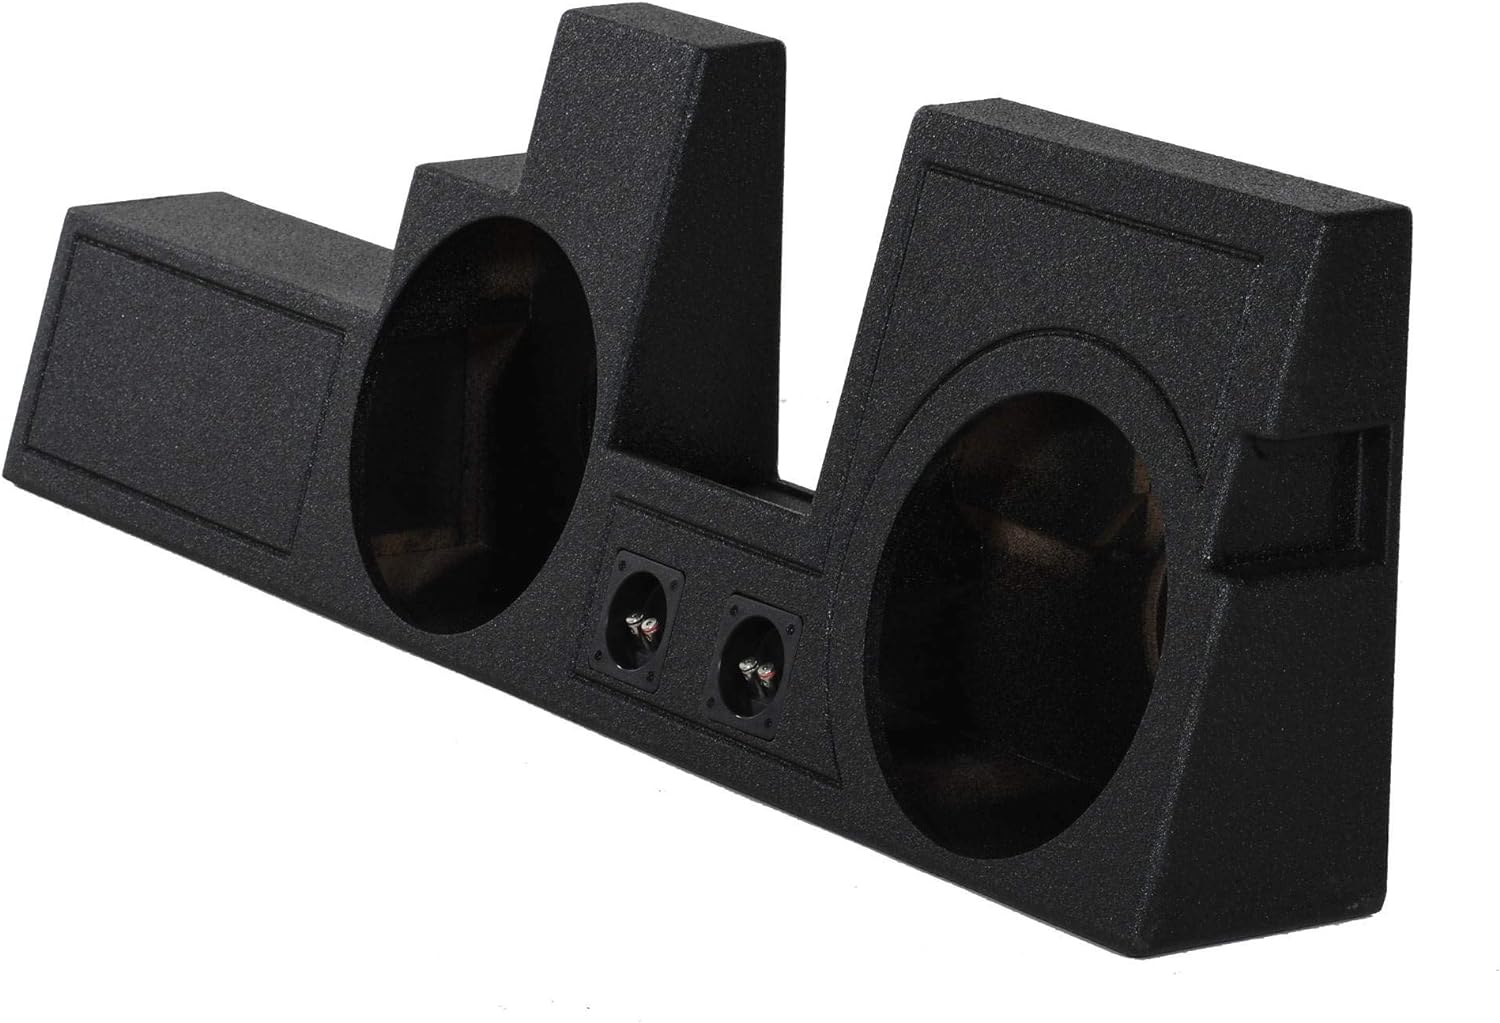 Super Duty Dual 12" Ported Subwoofer Box Enclosure for 2000-16 Ford F250/350/450 Black